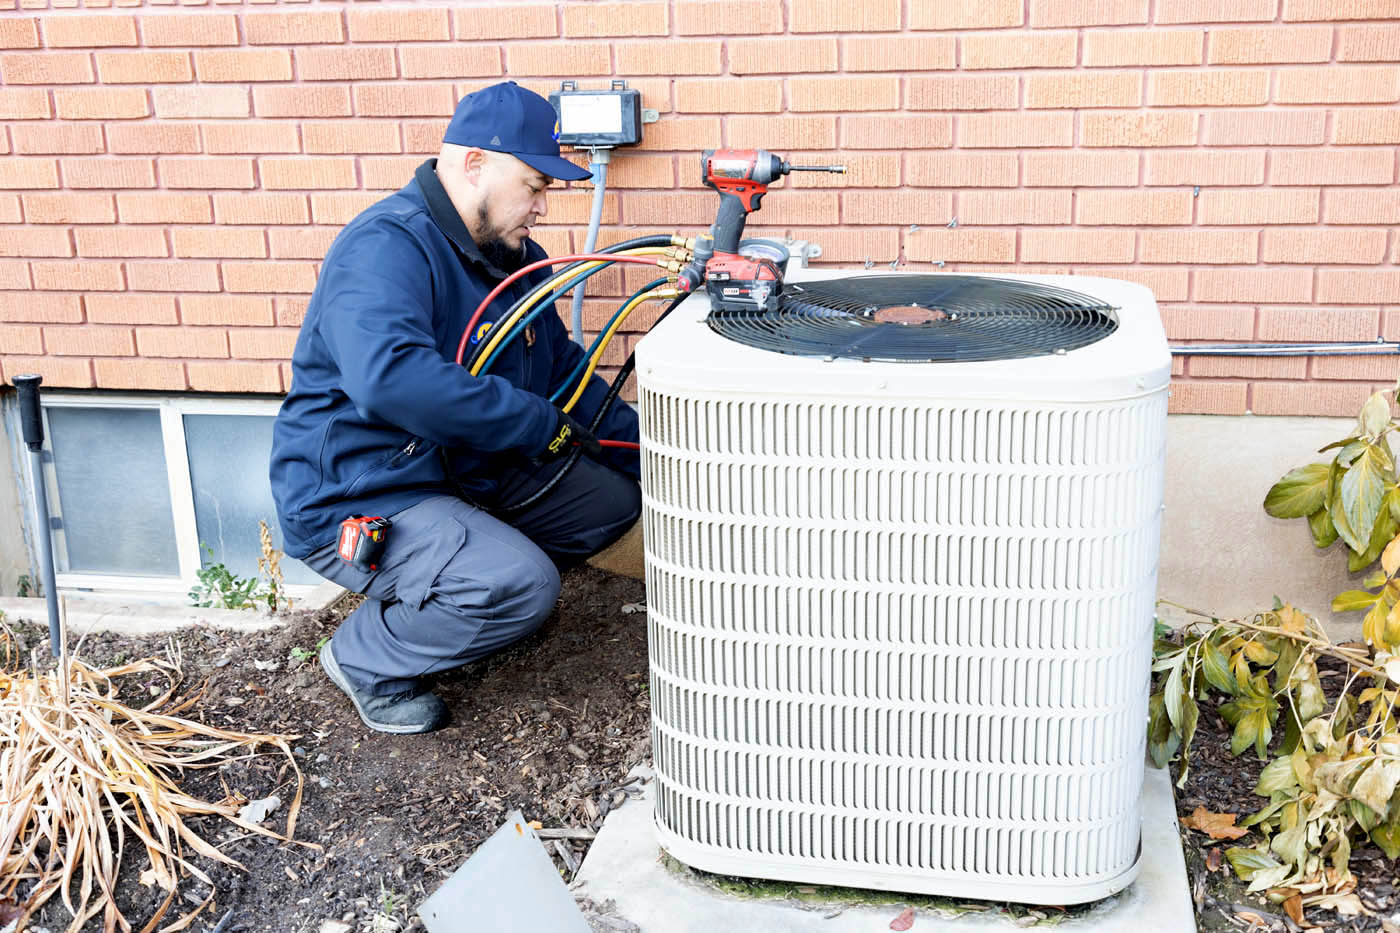 Absolute Comfort technicians working on an air conditioner unit - we almost always offer same-day air conditioning service repair.